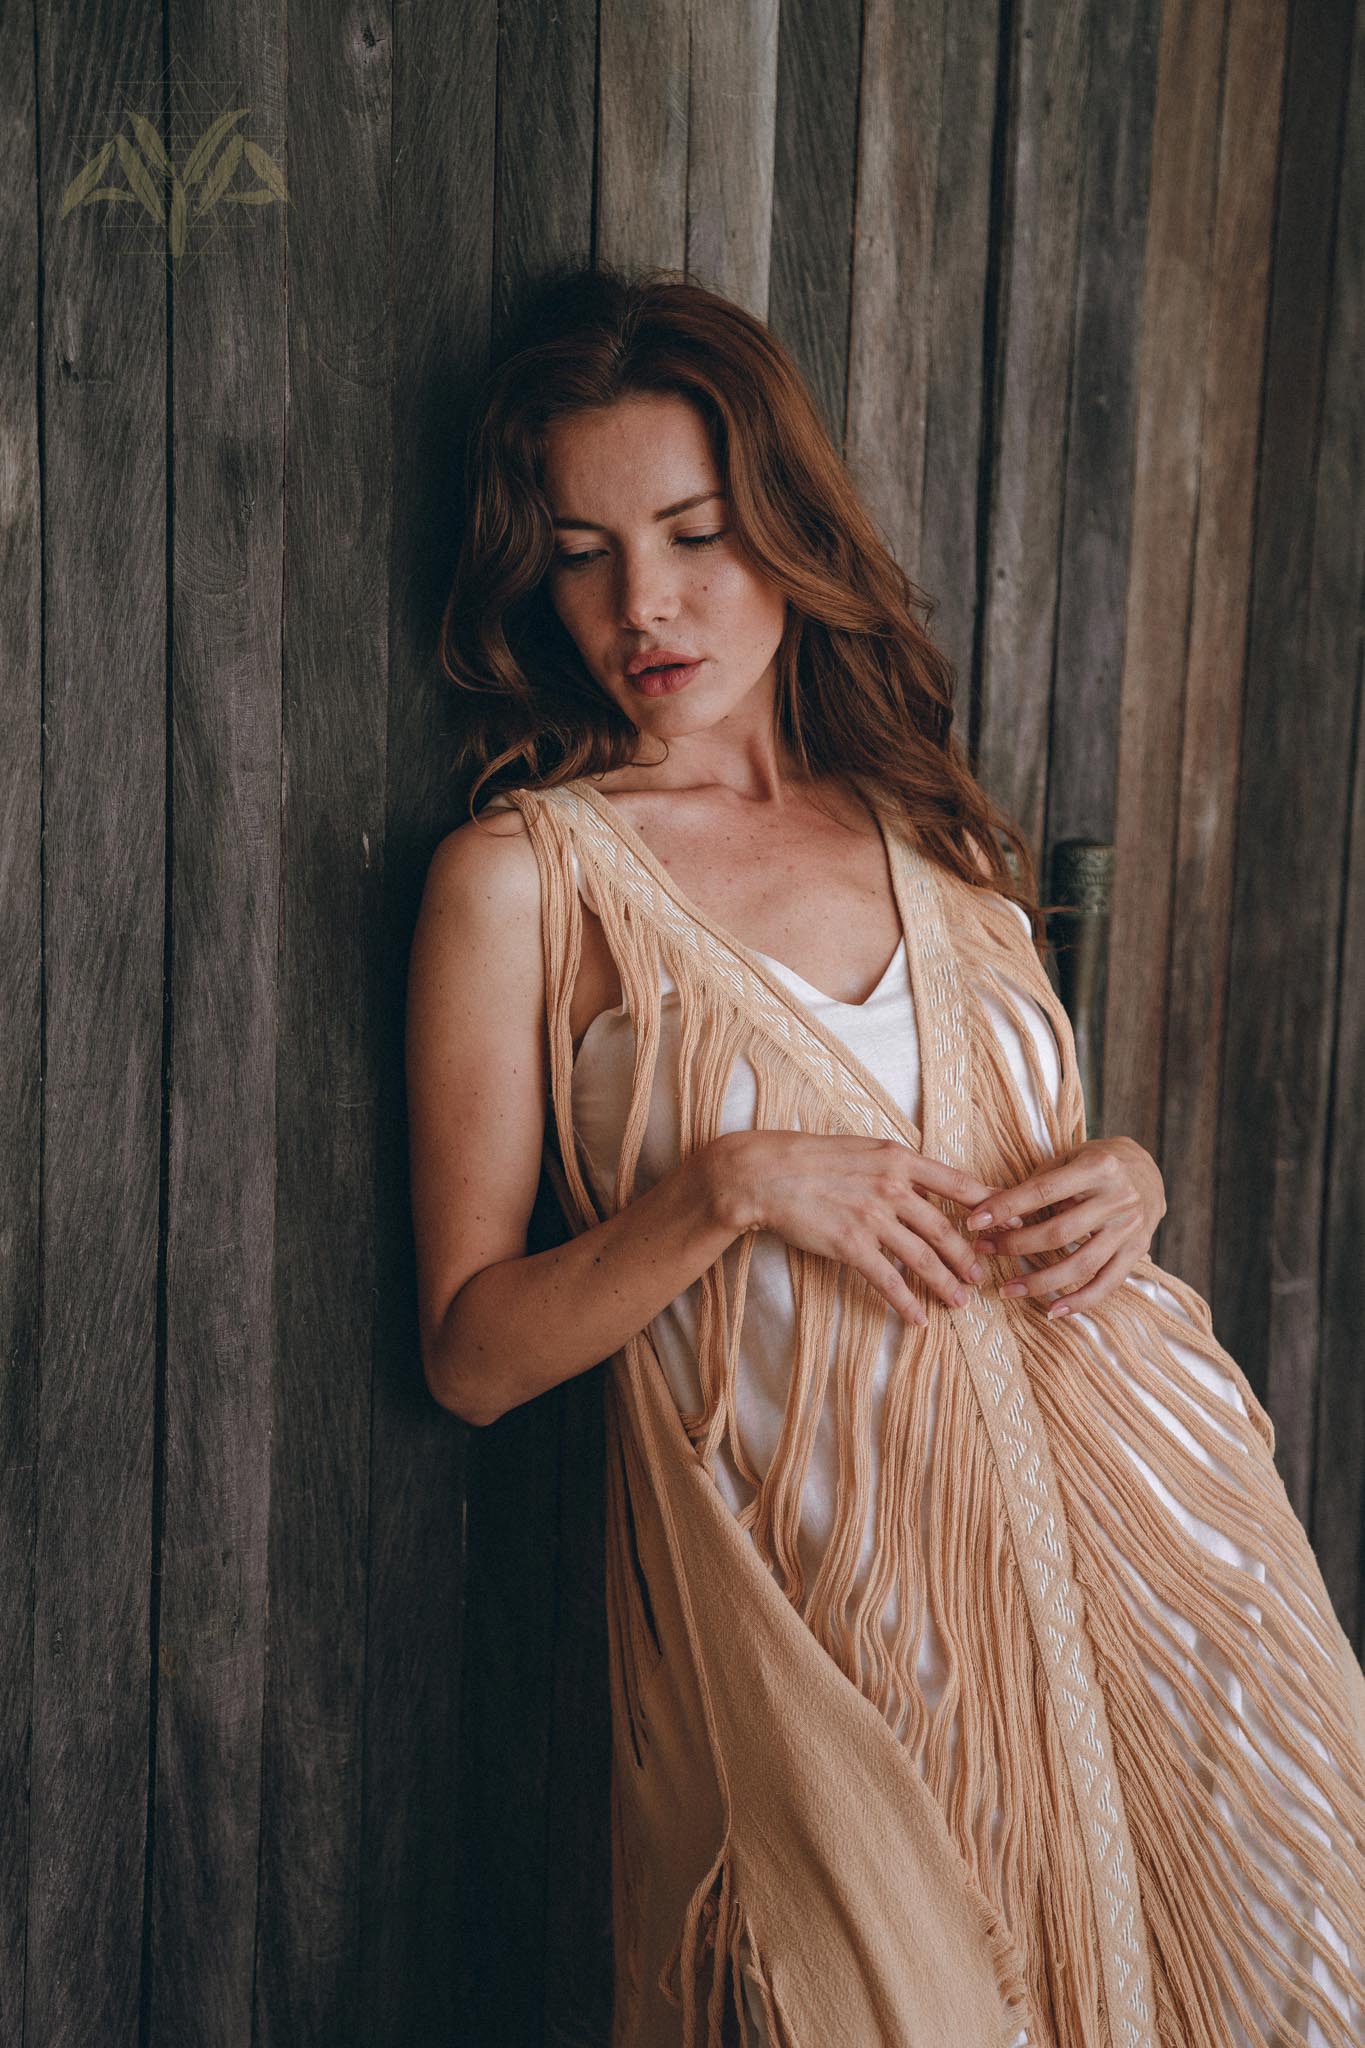 Love at first sight with this heavenly beige ochre hand-woven dress.